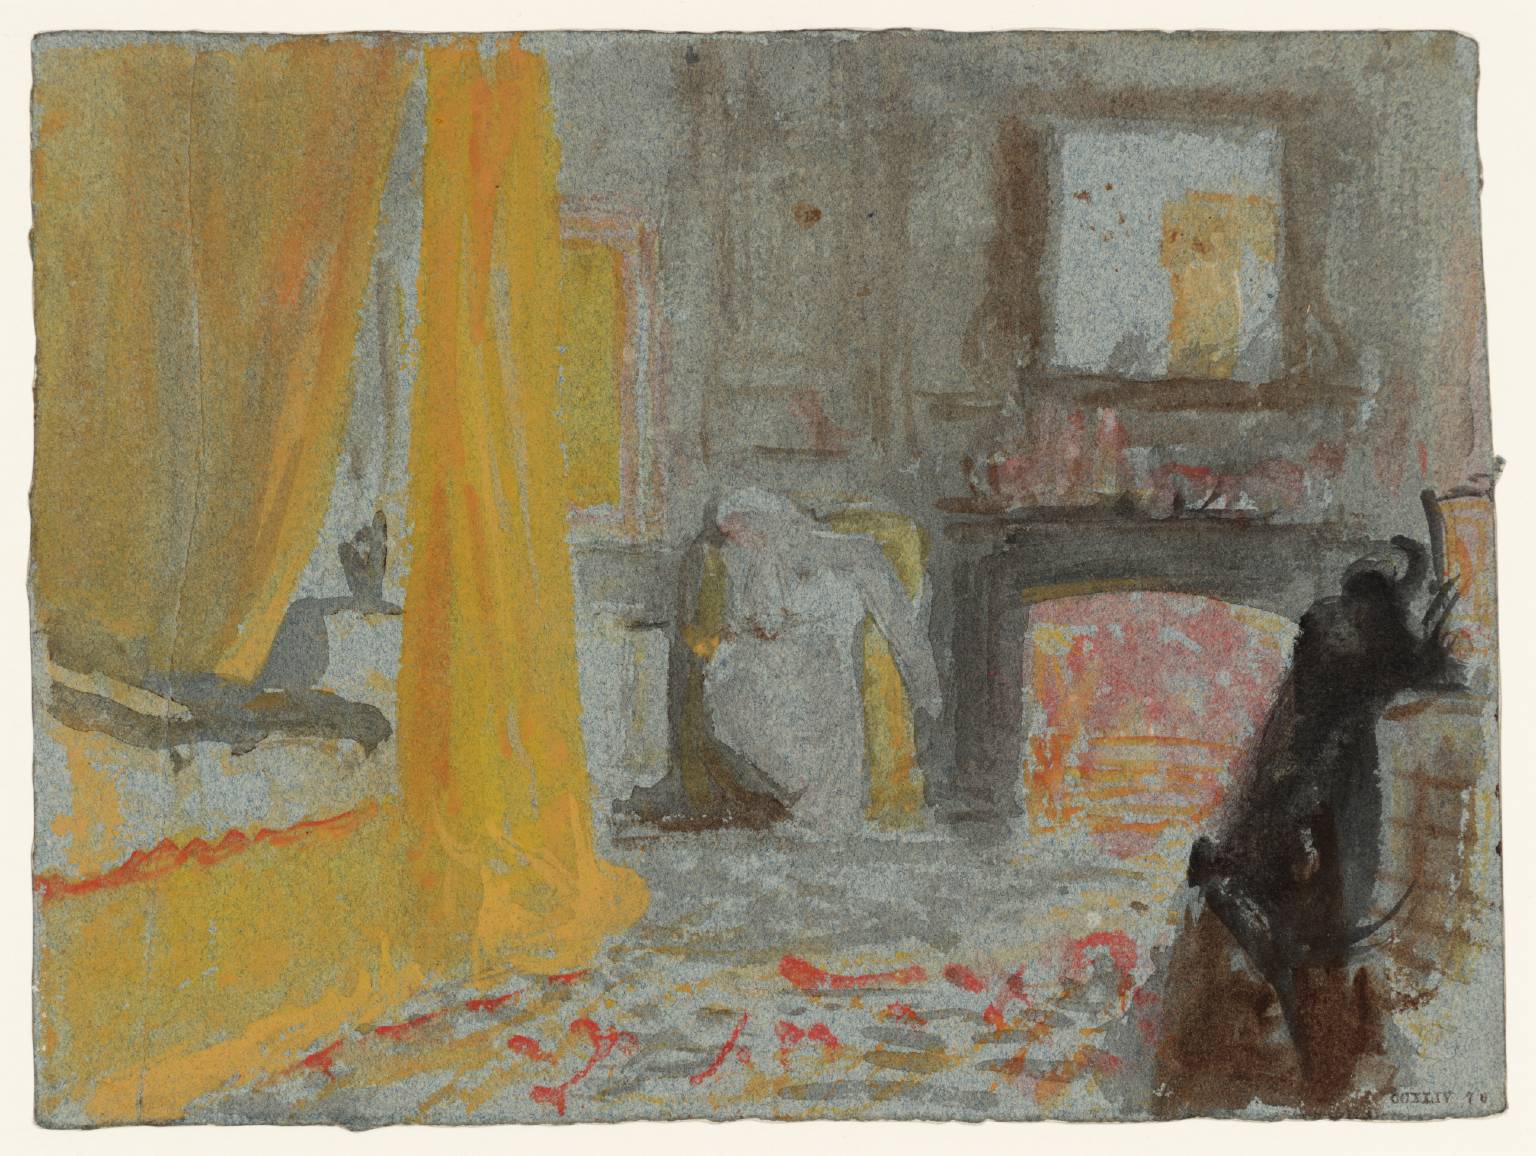 D22738: A Bedroom with a Fire Burning, and a Bed with Yellow Curtains